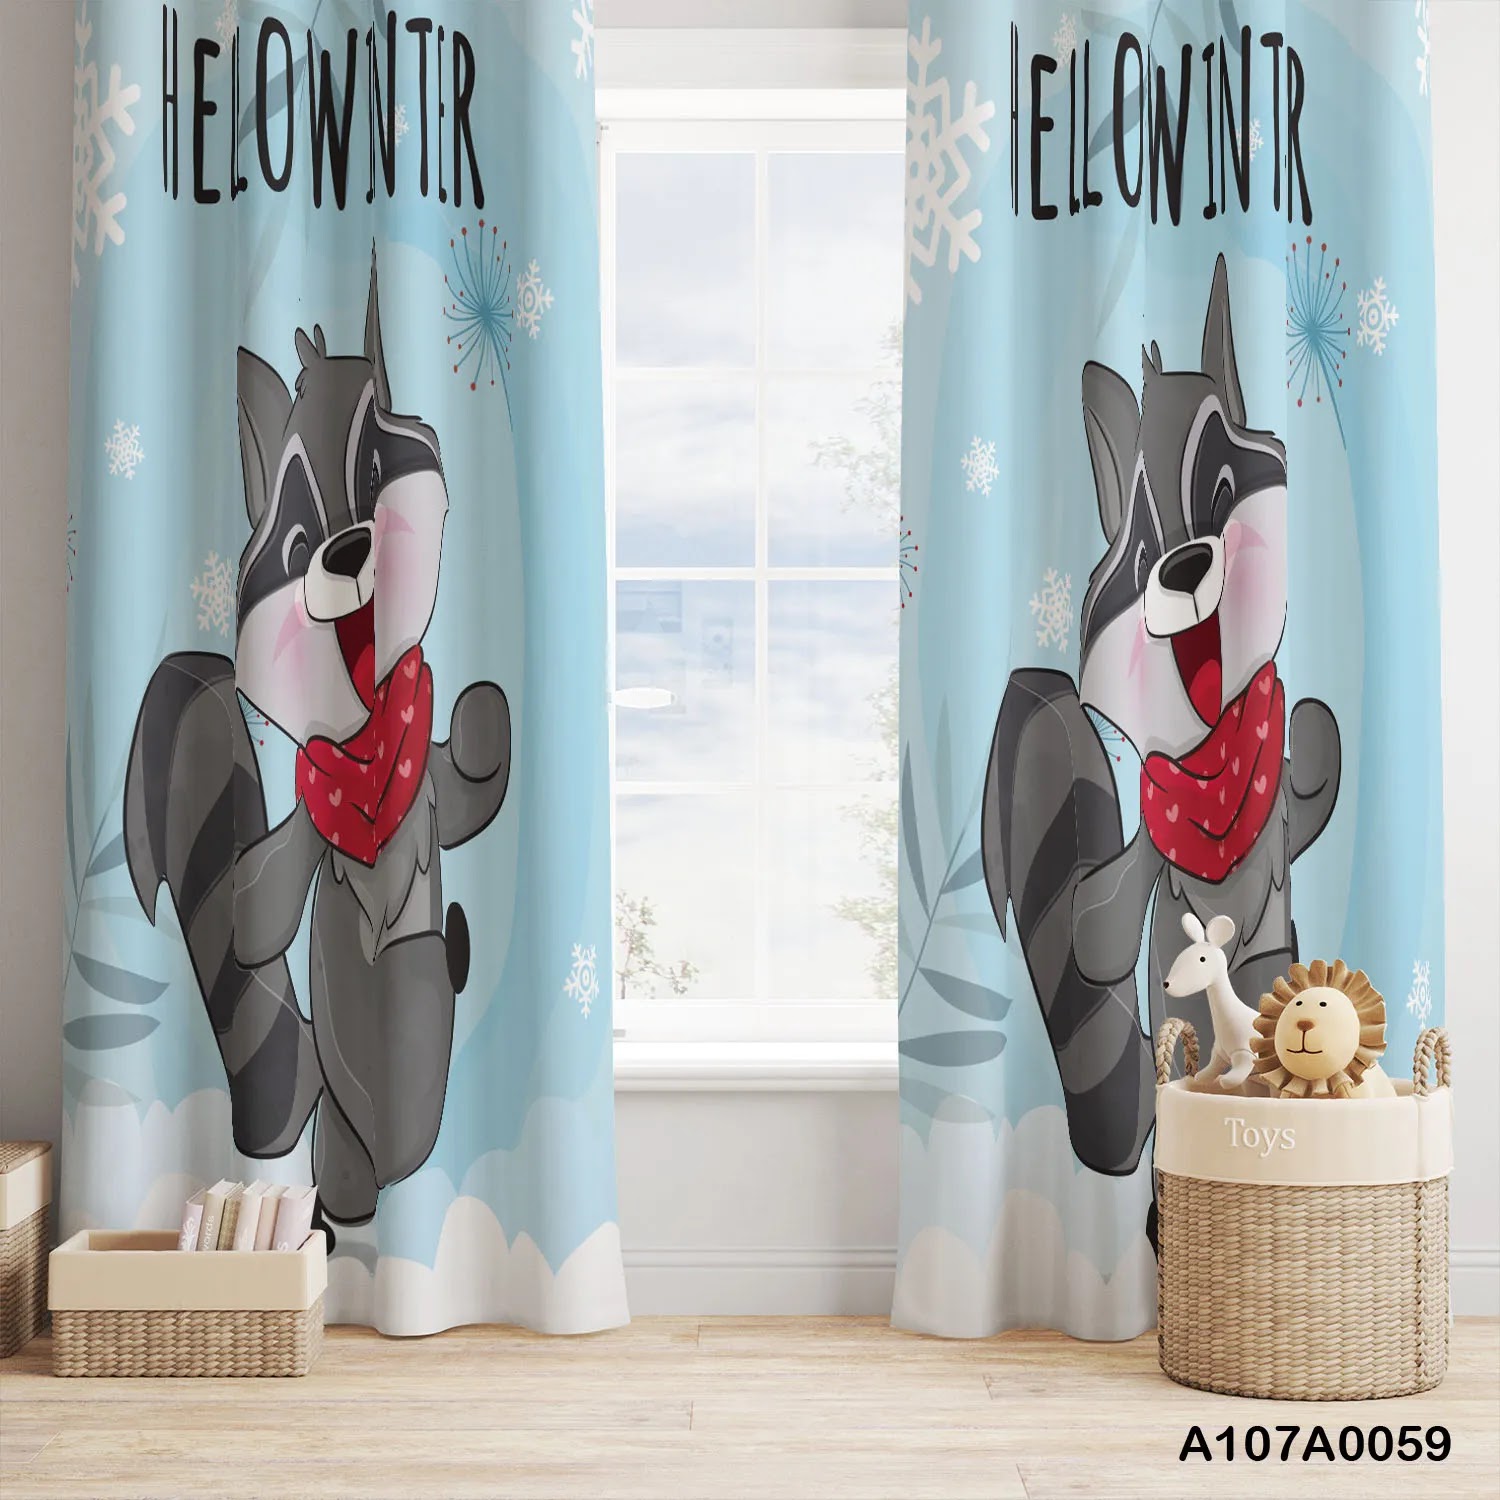 Curtains for children room with raccoon and "Hello winter"